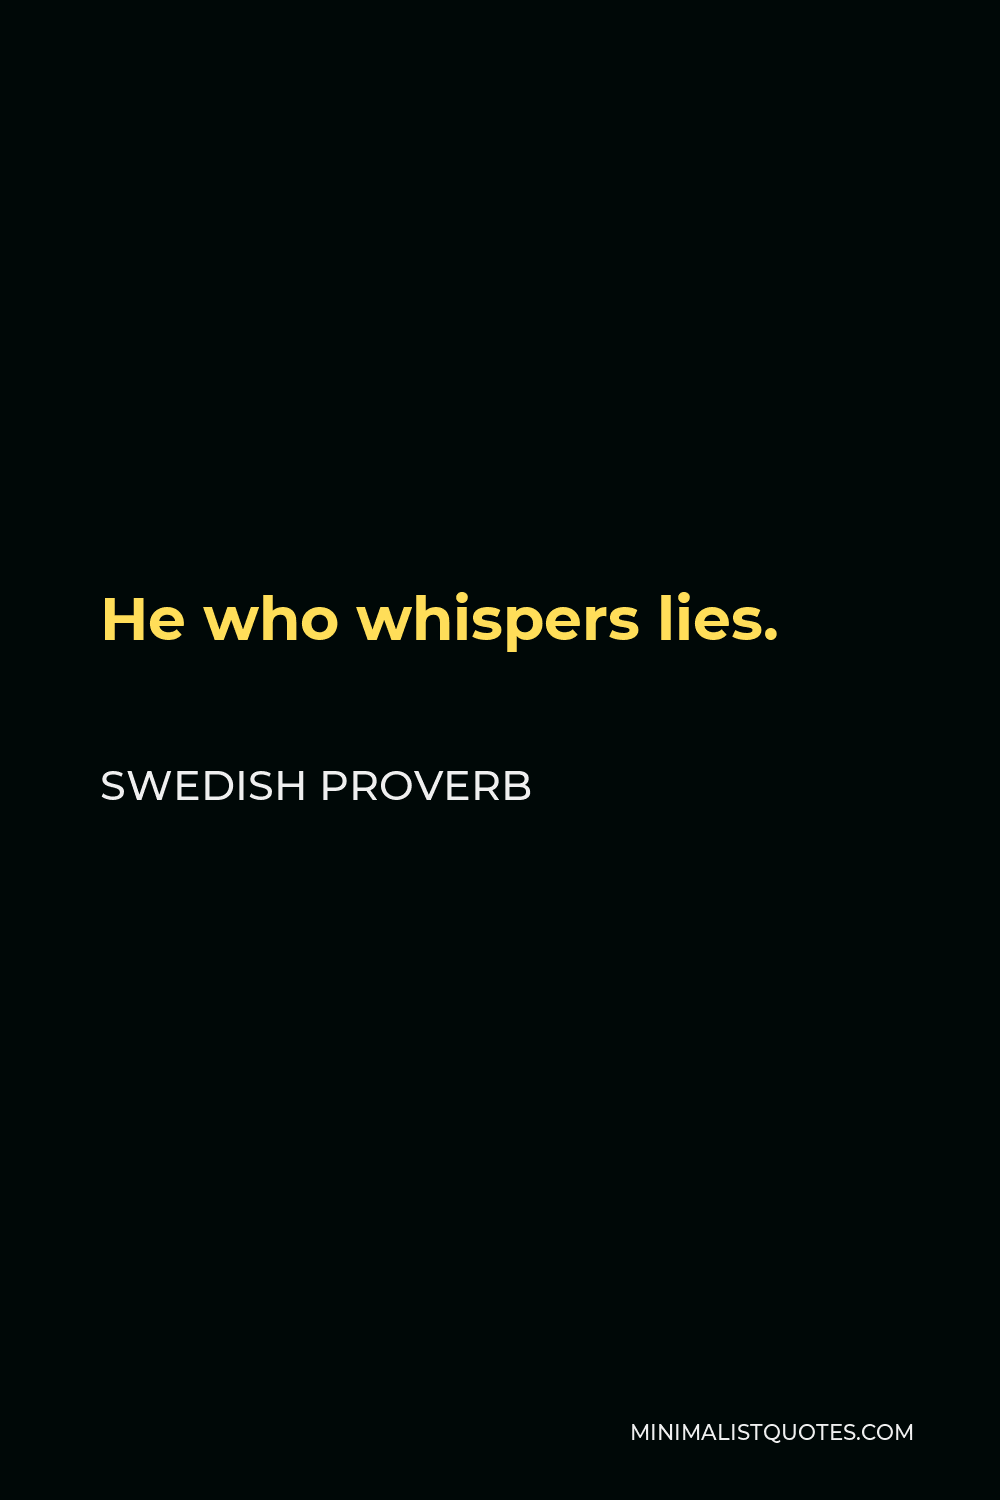 Swedish Proverb Quote - He who whispers lies.